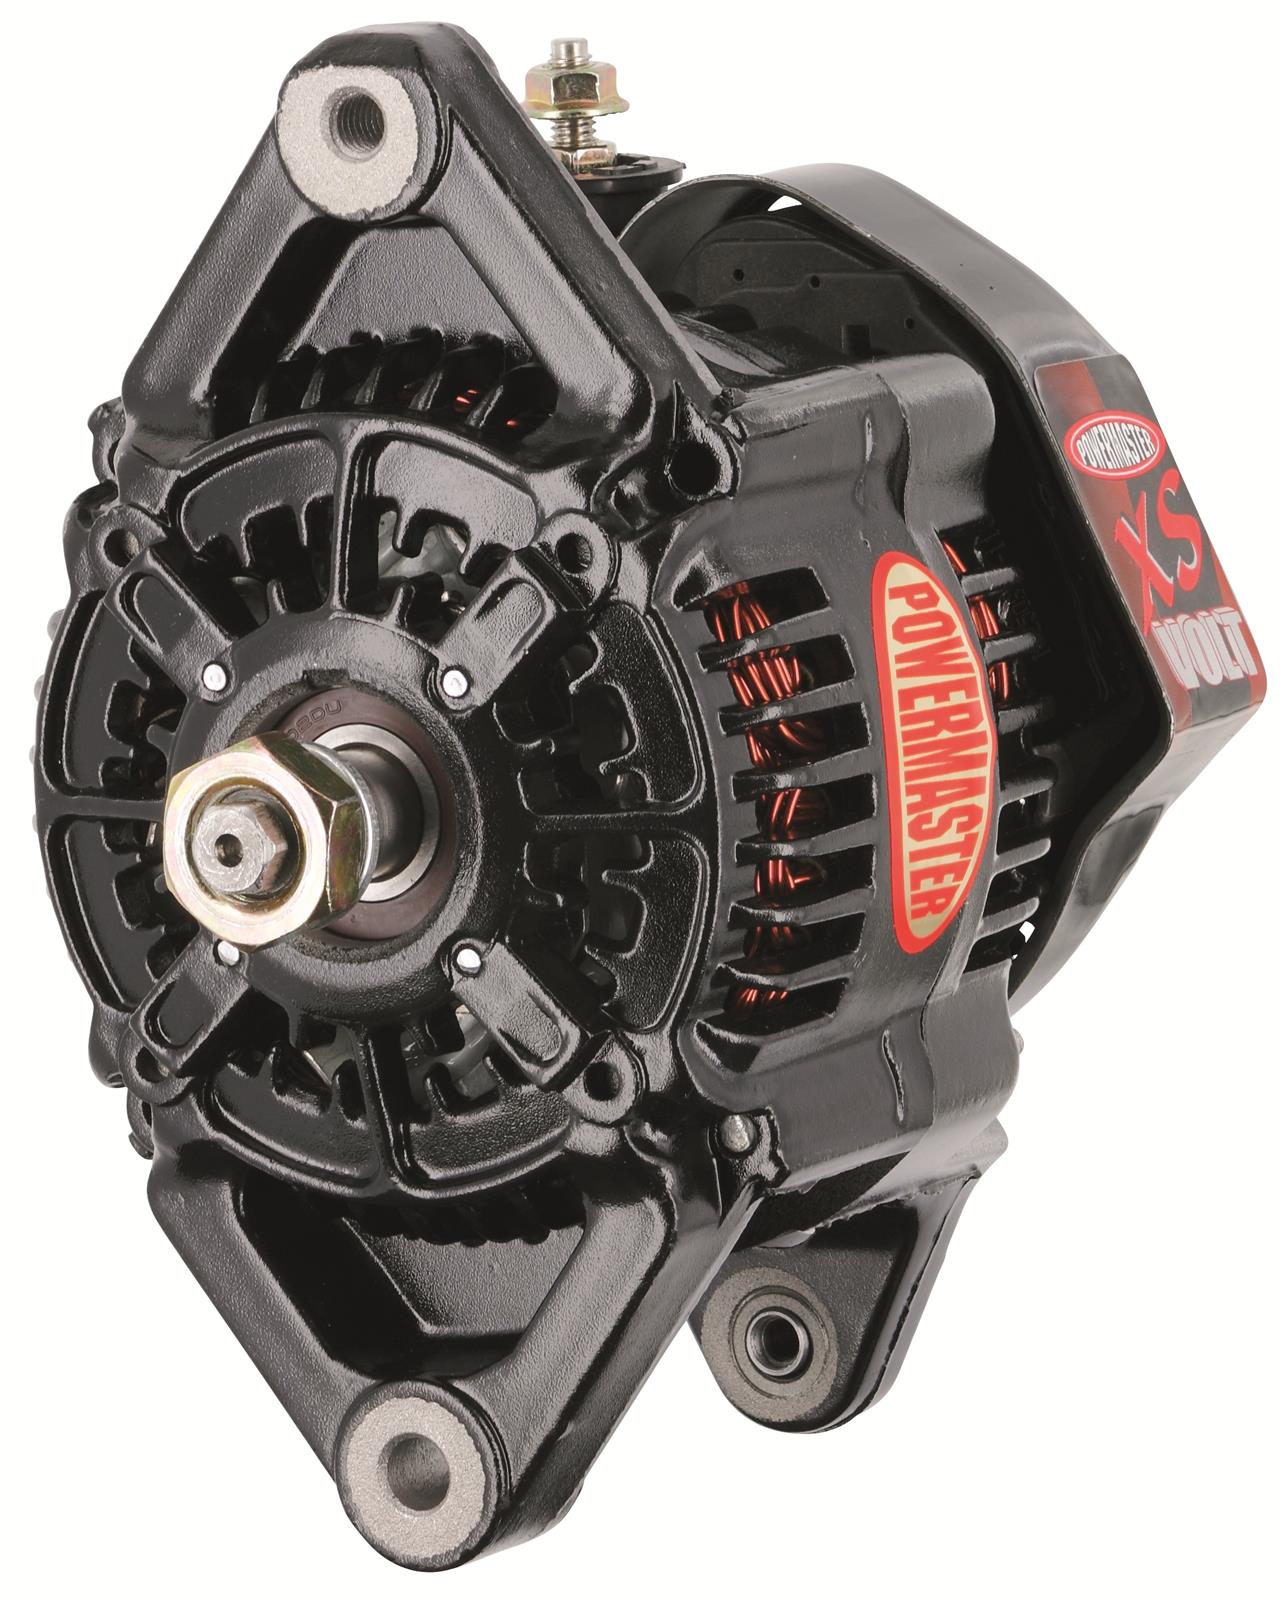 Powermaster Performance 48405 Natural Alternator 4G 200A 6 Groove Pulley Trans Mating PCM Controlled LI-SIG-AS Regular 